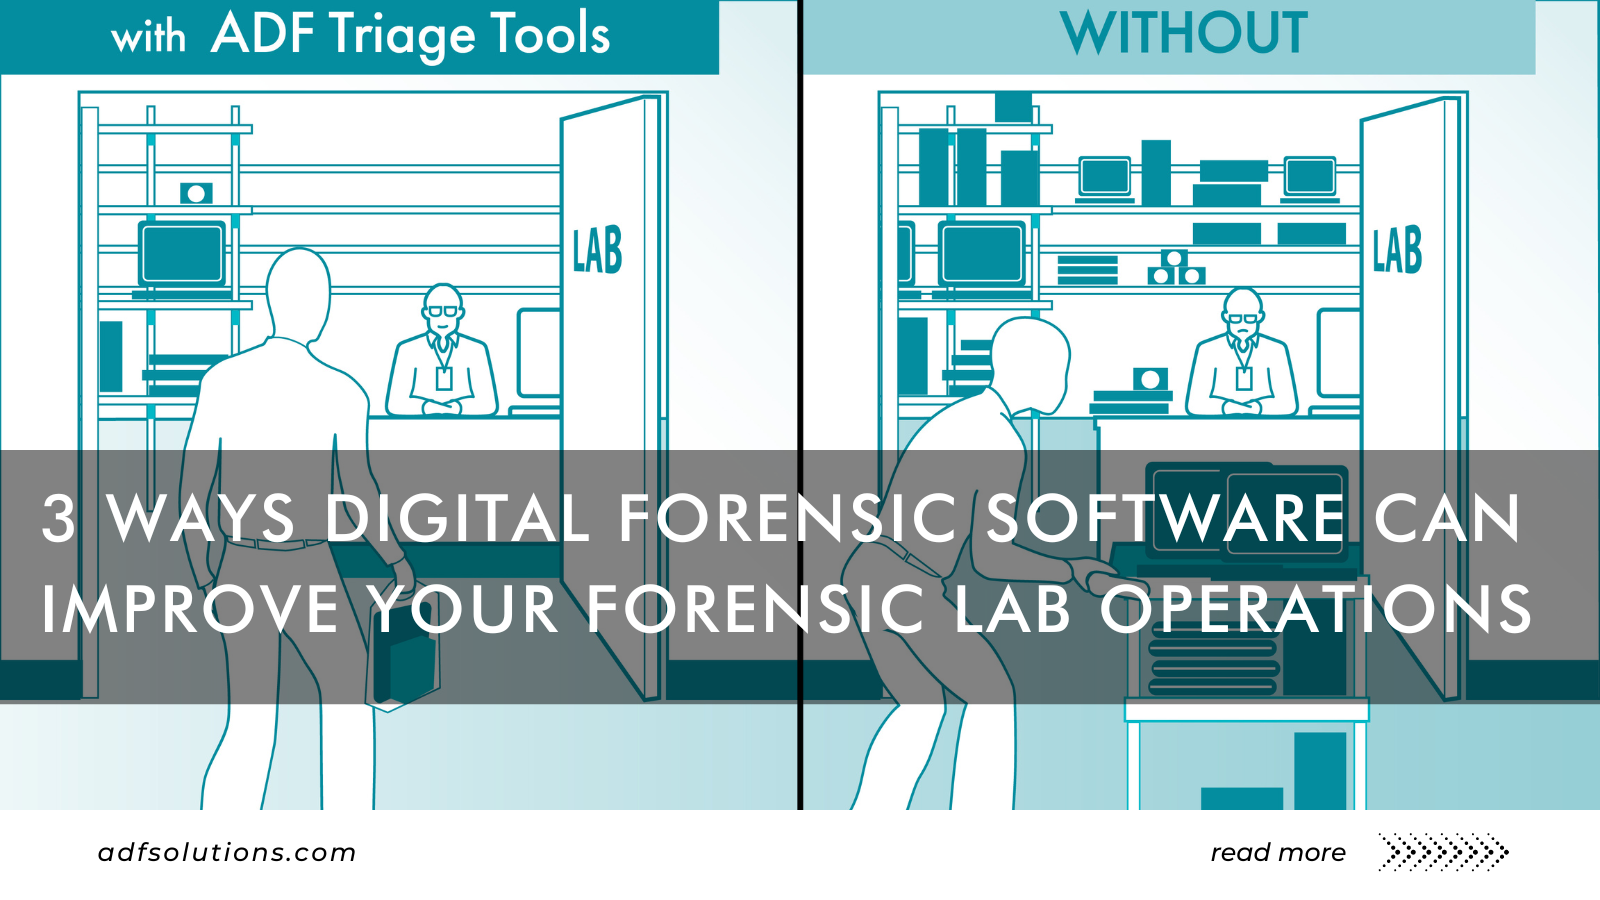 3 Ways Digital Forensic Software Can Improve Your Forensic Lab Operations